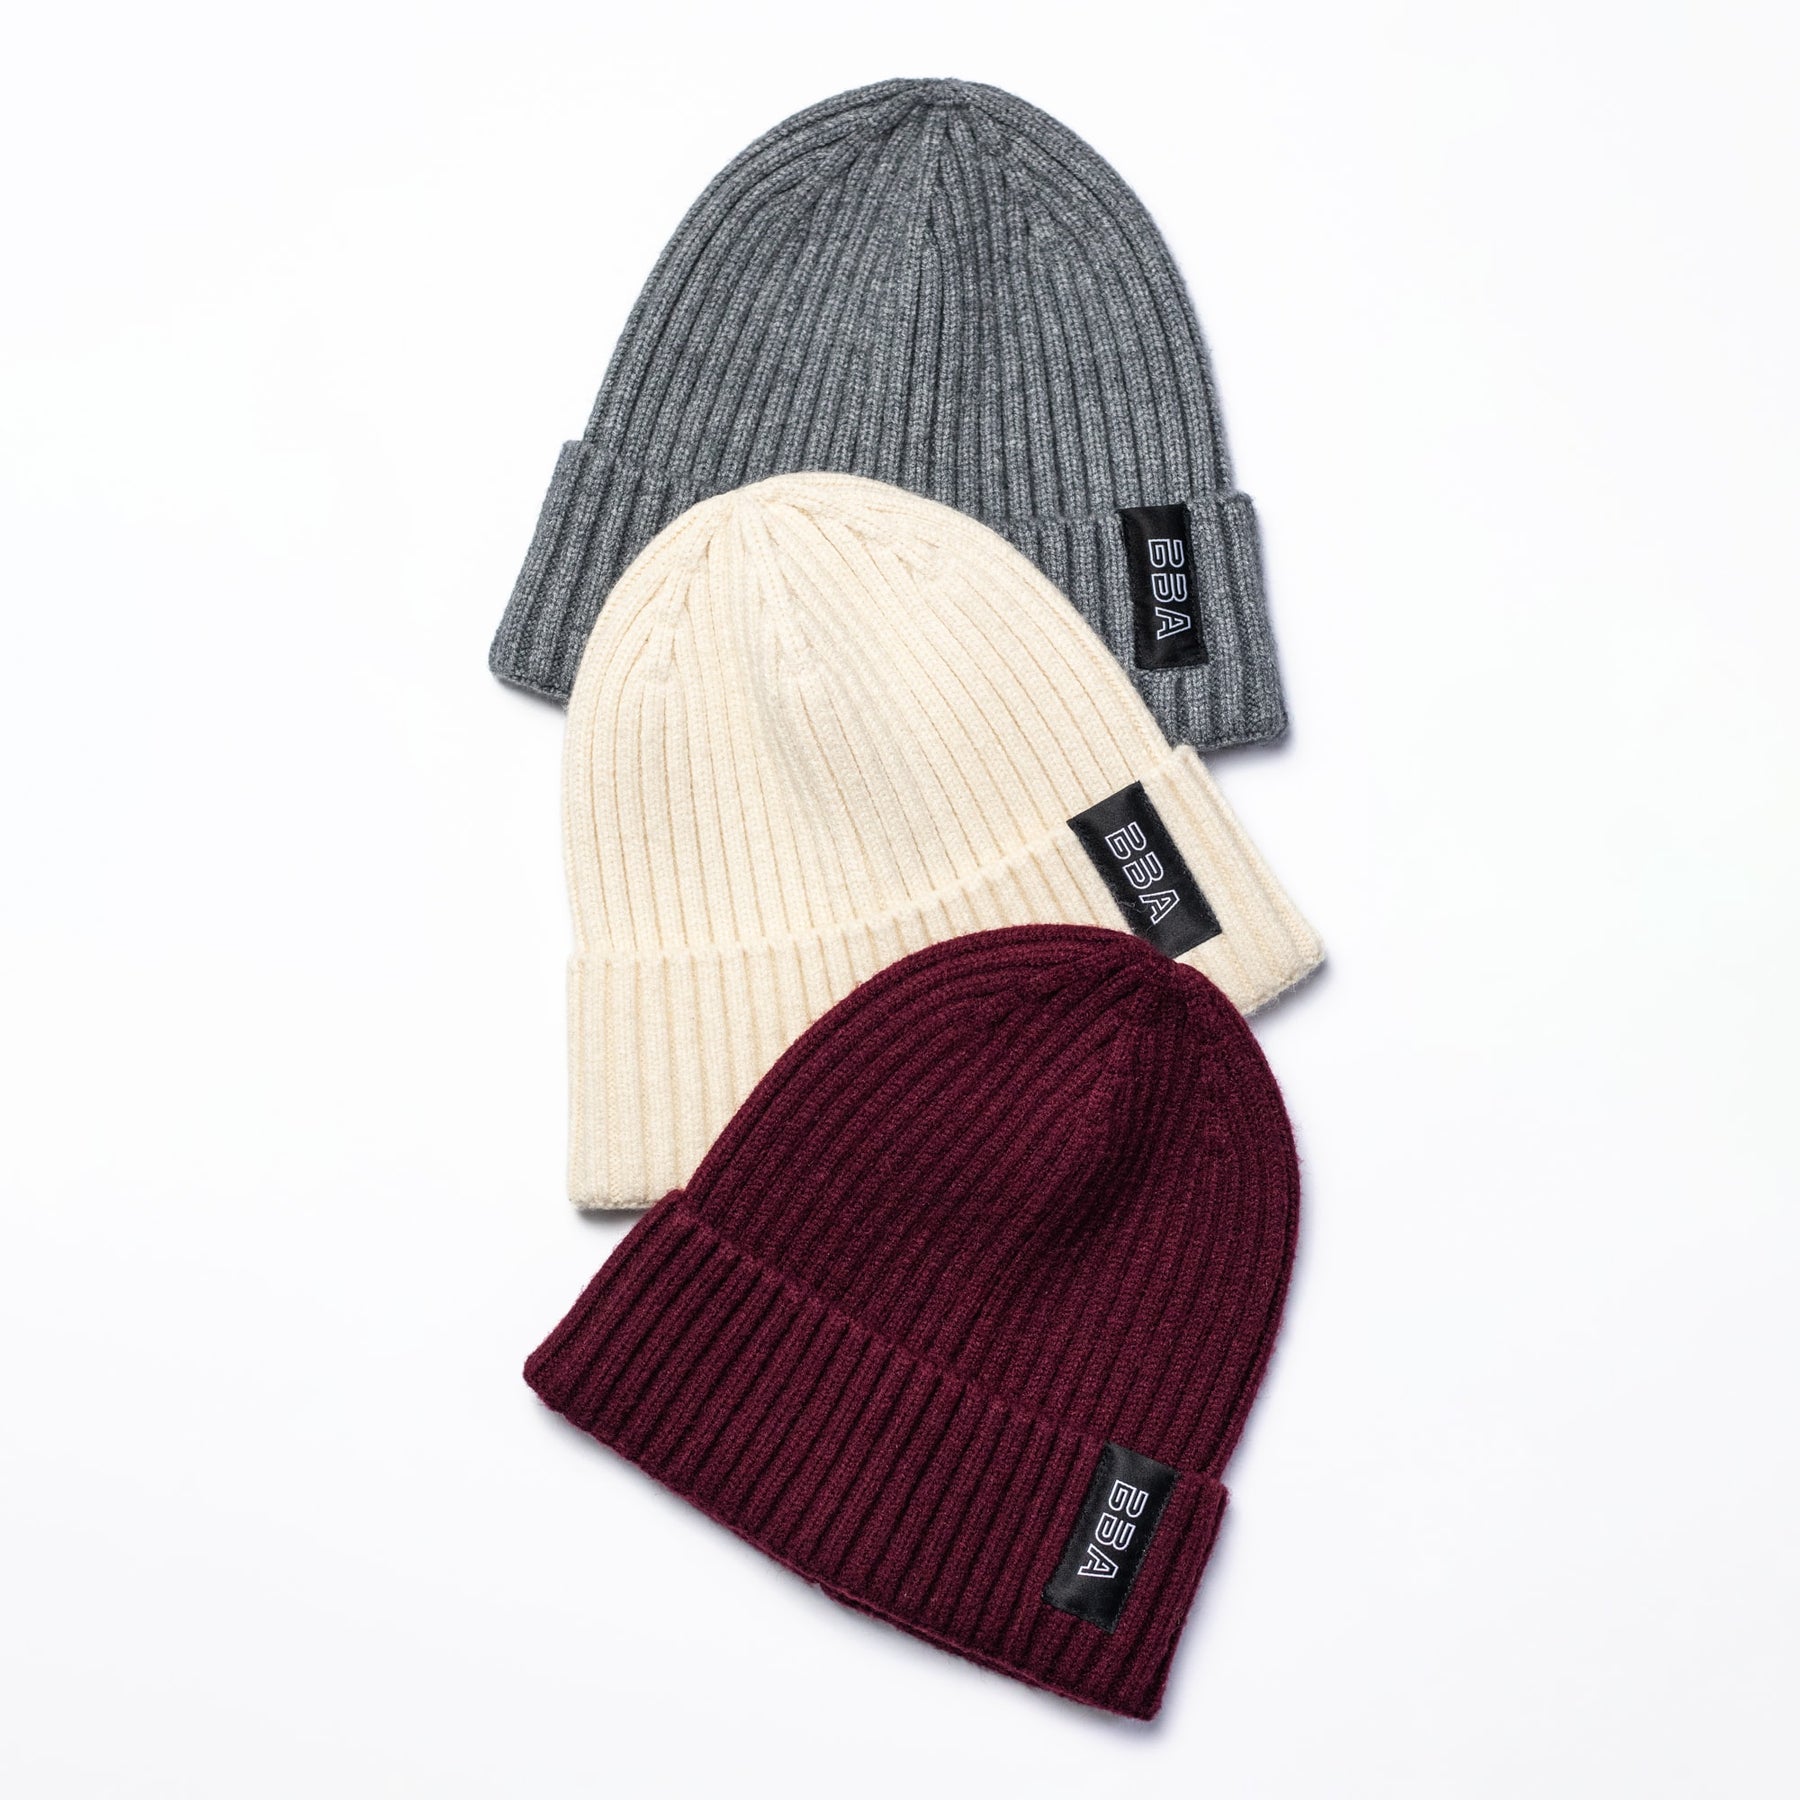 Classic – Grey Built Ambition | Beanie by